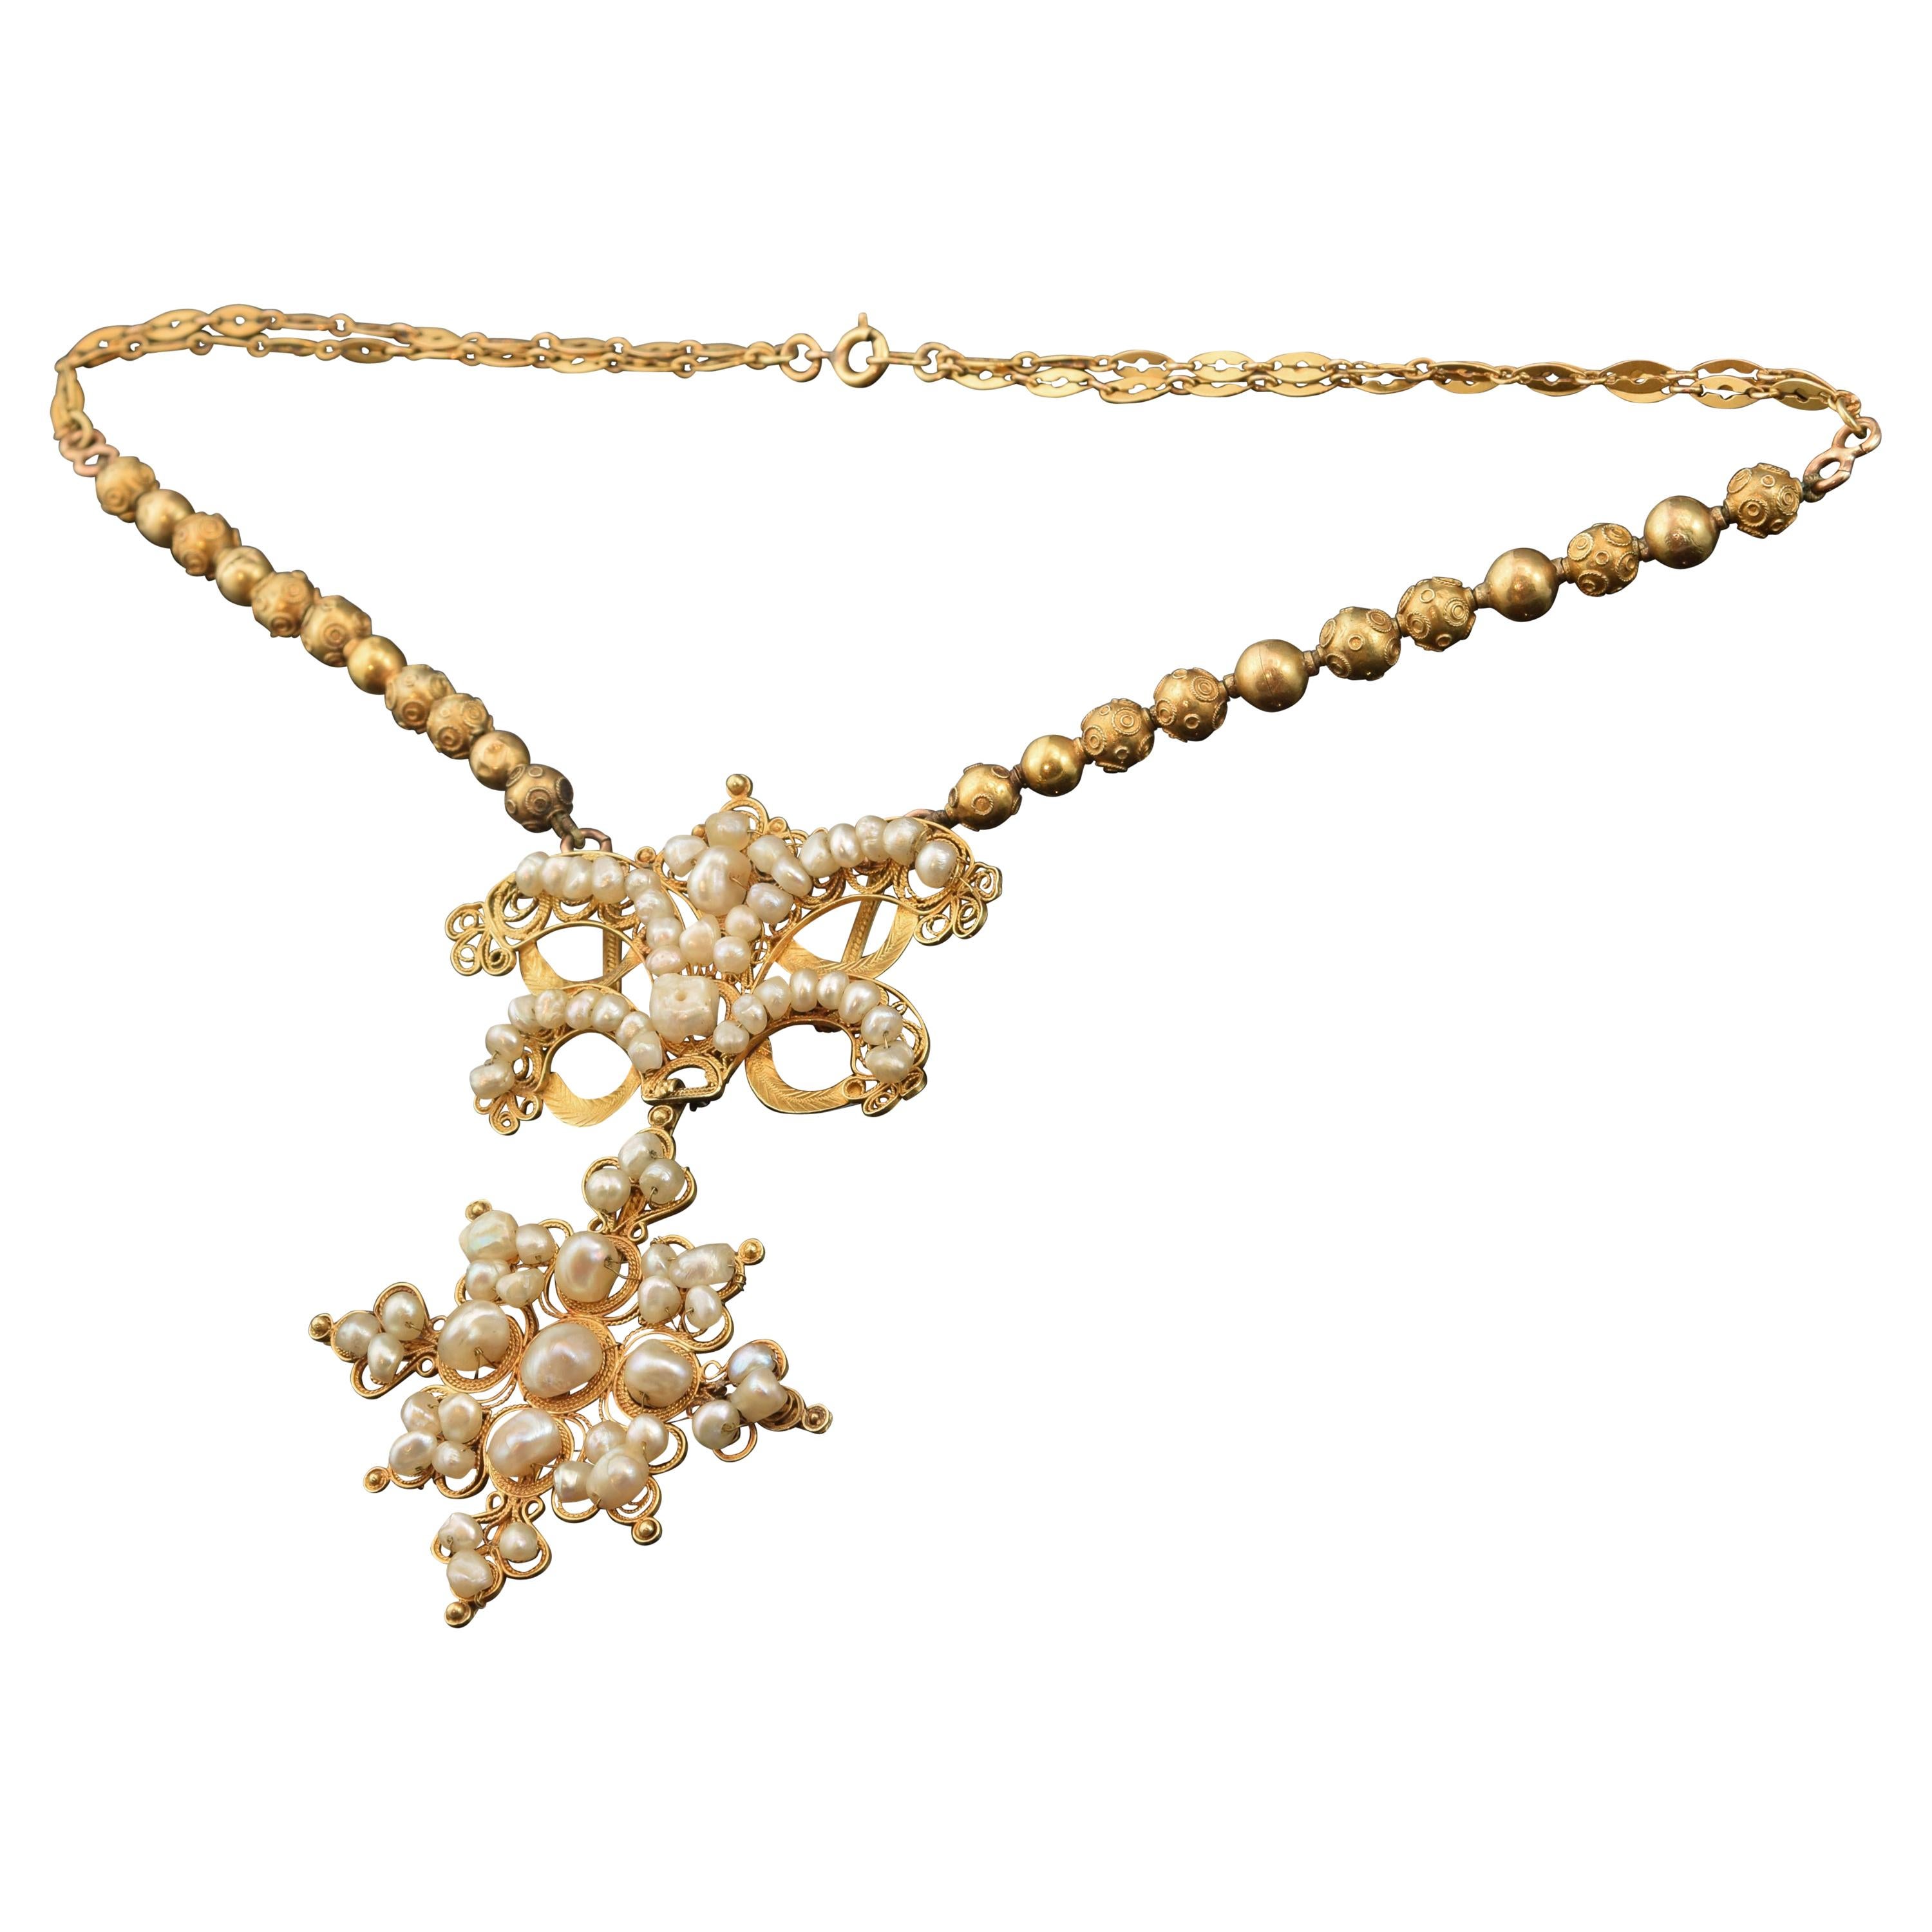 Short Necklace 'choker', Gold, Pearls, circa Late 19th Century